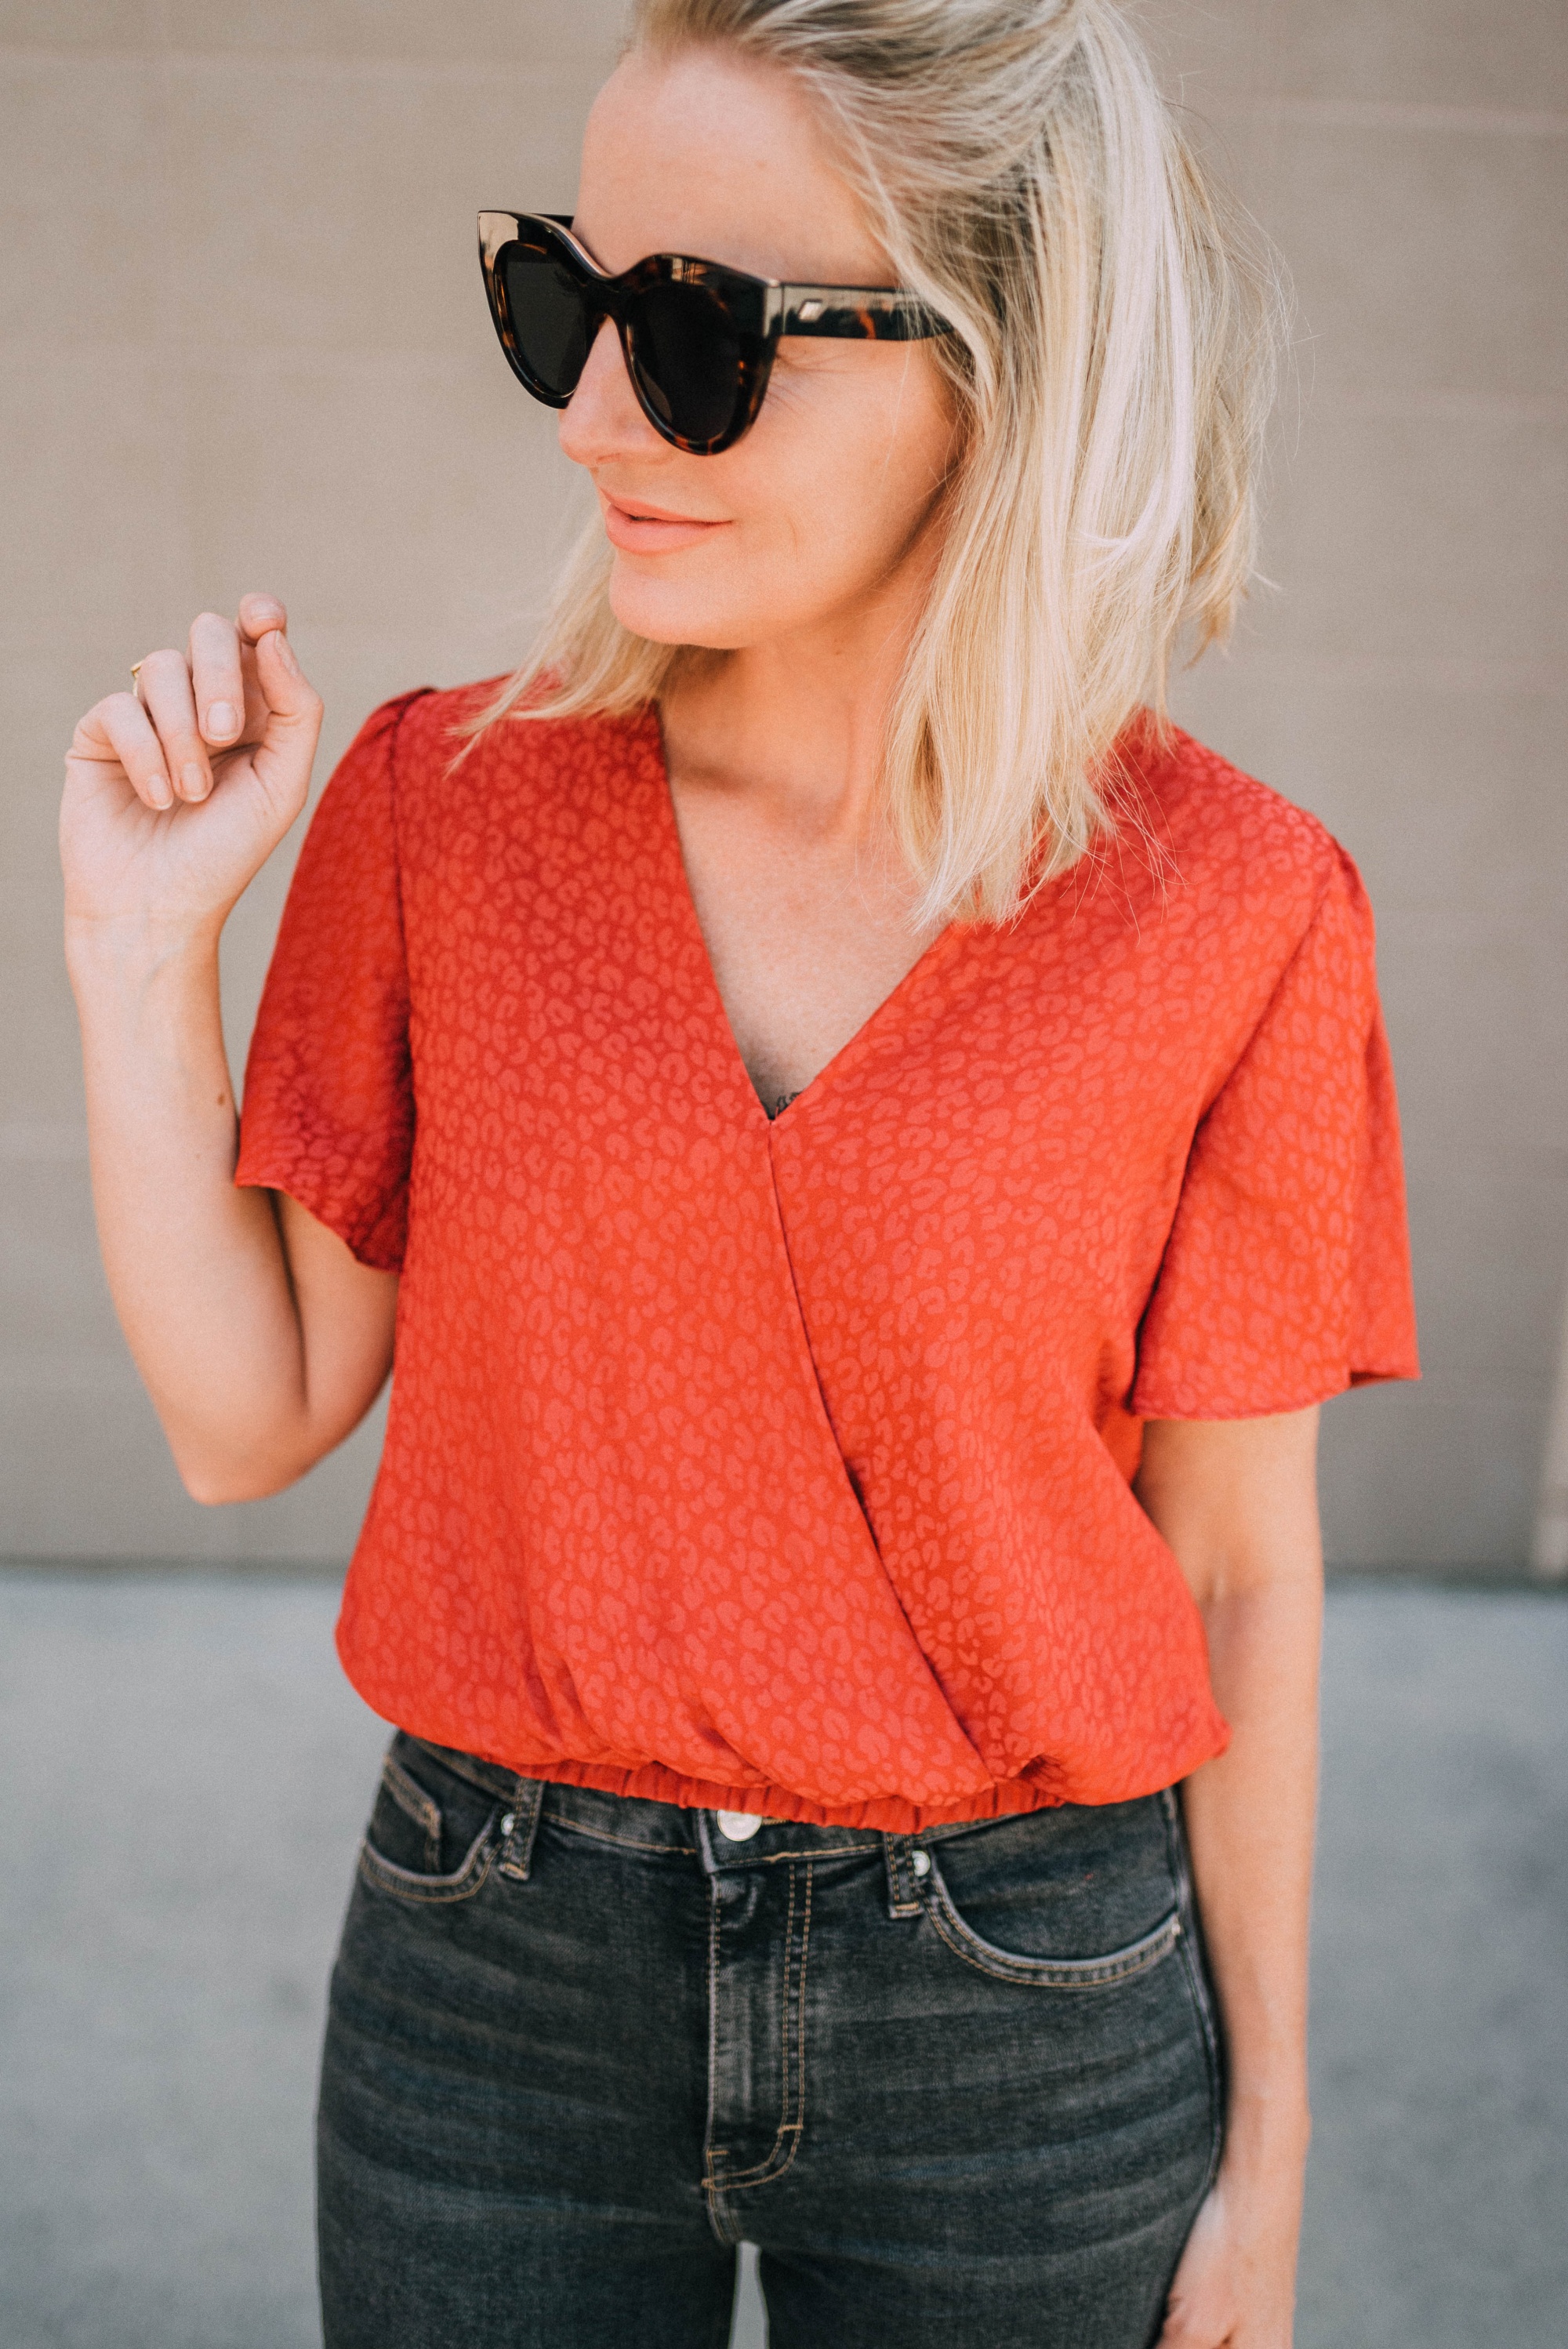 Red, Fashion blogger Erin Busbee of BusbeeStyle.com wearing a red ASTR The Label jacquard top from The Nordstrom Anniversary Sale 2019